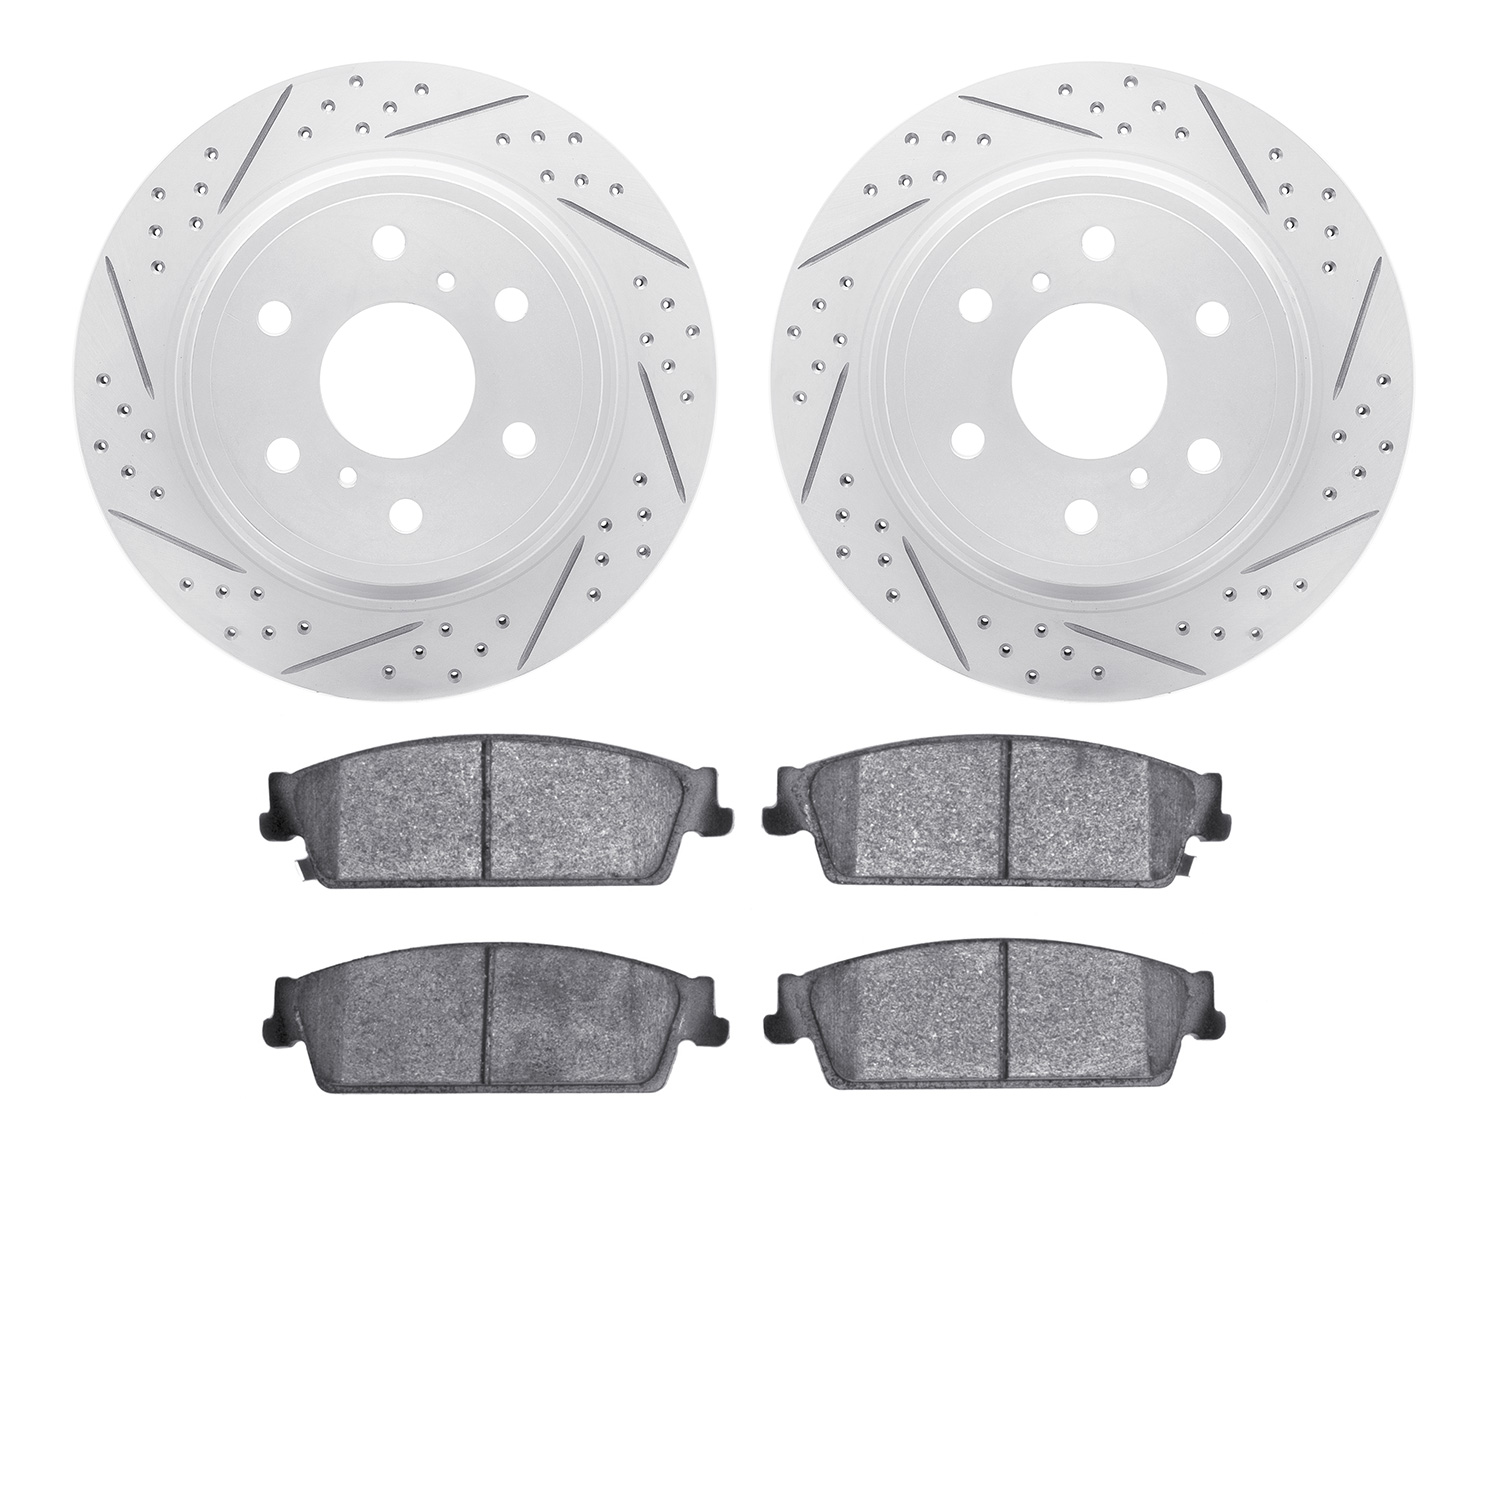 2502-48062 Geoperformance Drilled/Slotted Rotors w/5000 Advanced Brake Pads Kit, 2007-2014 GM, Position: Rear